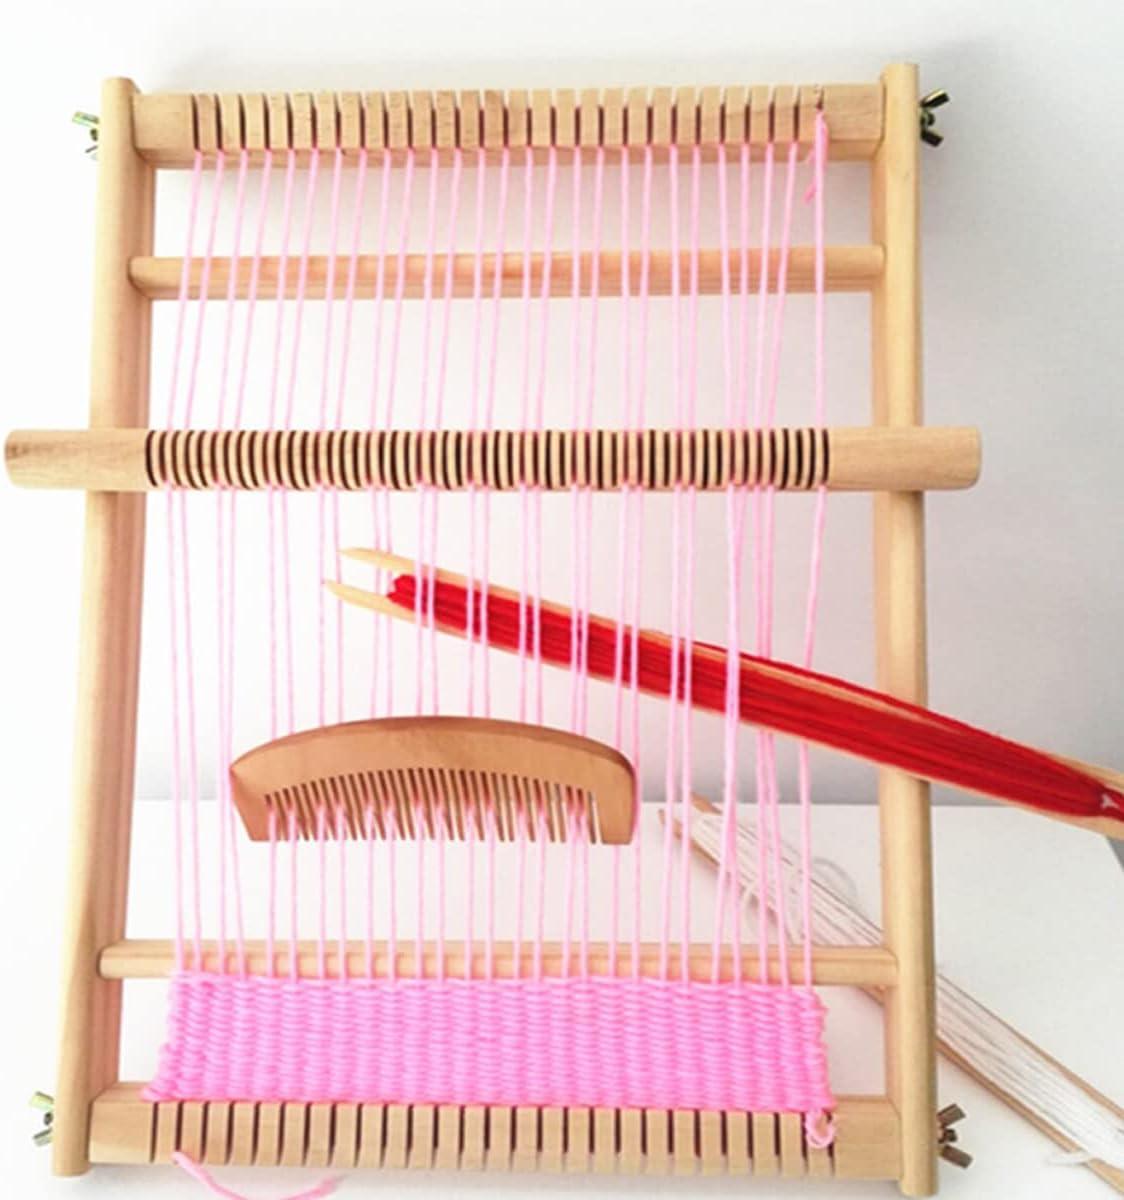 Weaving Loom Kit,Wooden Multi-Craft Weaving Loom Tapestry Loom Large Frame  9.85x 15.75x 1.3inch,DIY Hand-Knitting Weaving Machinewith Loom Stick Bar  for Kids, Adult and Beginners Handcraft Loom White